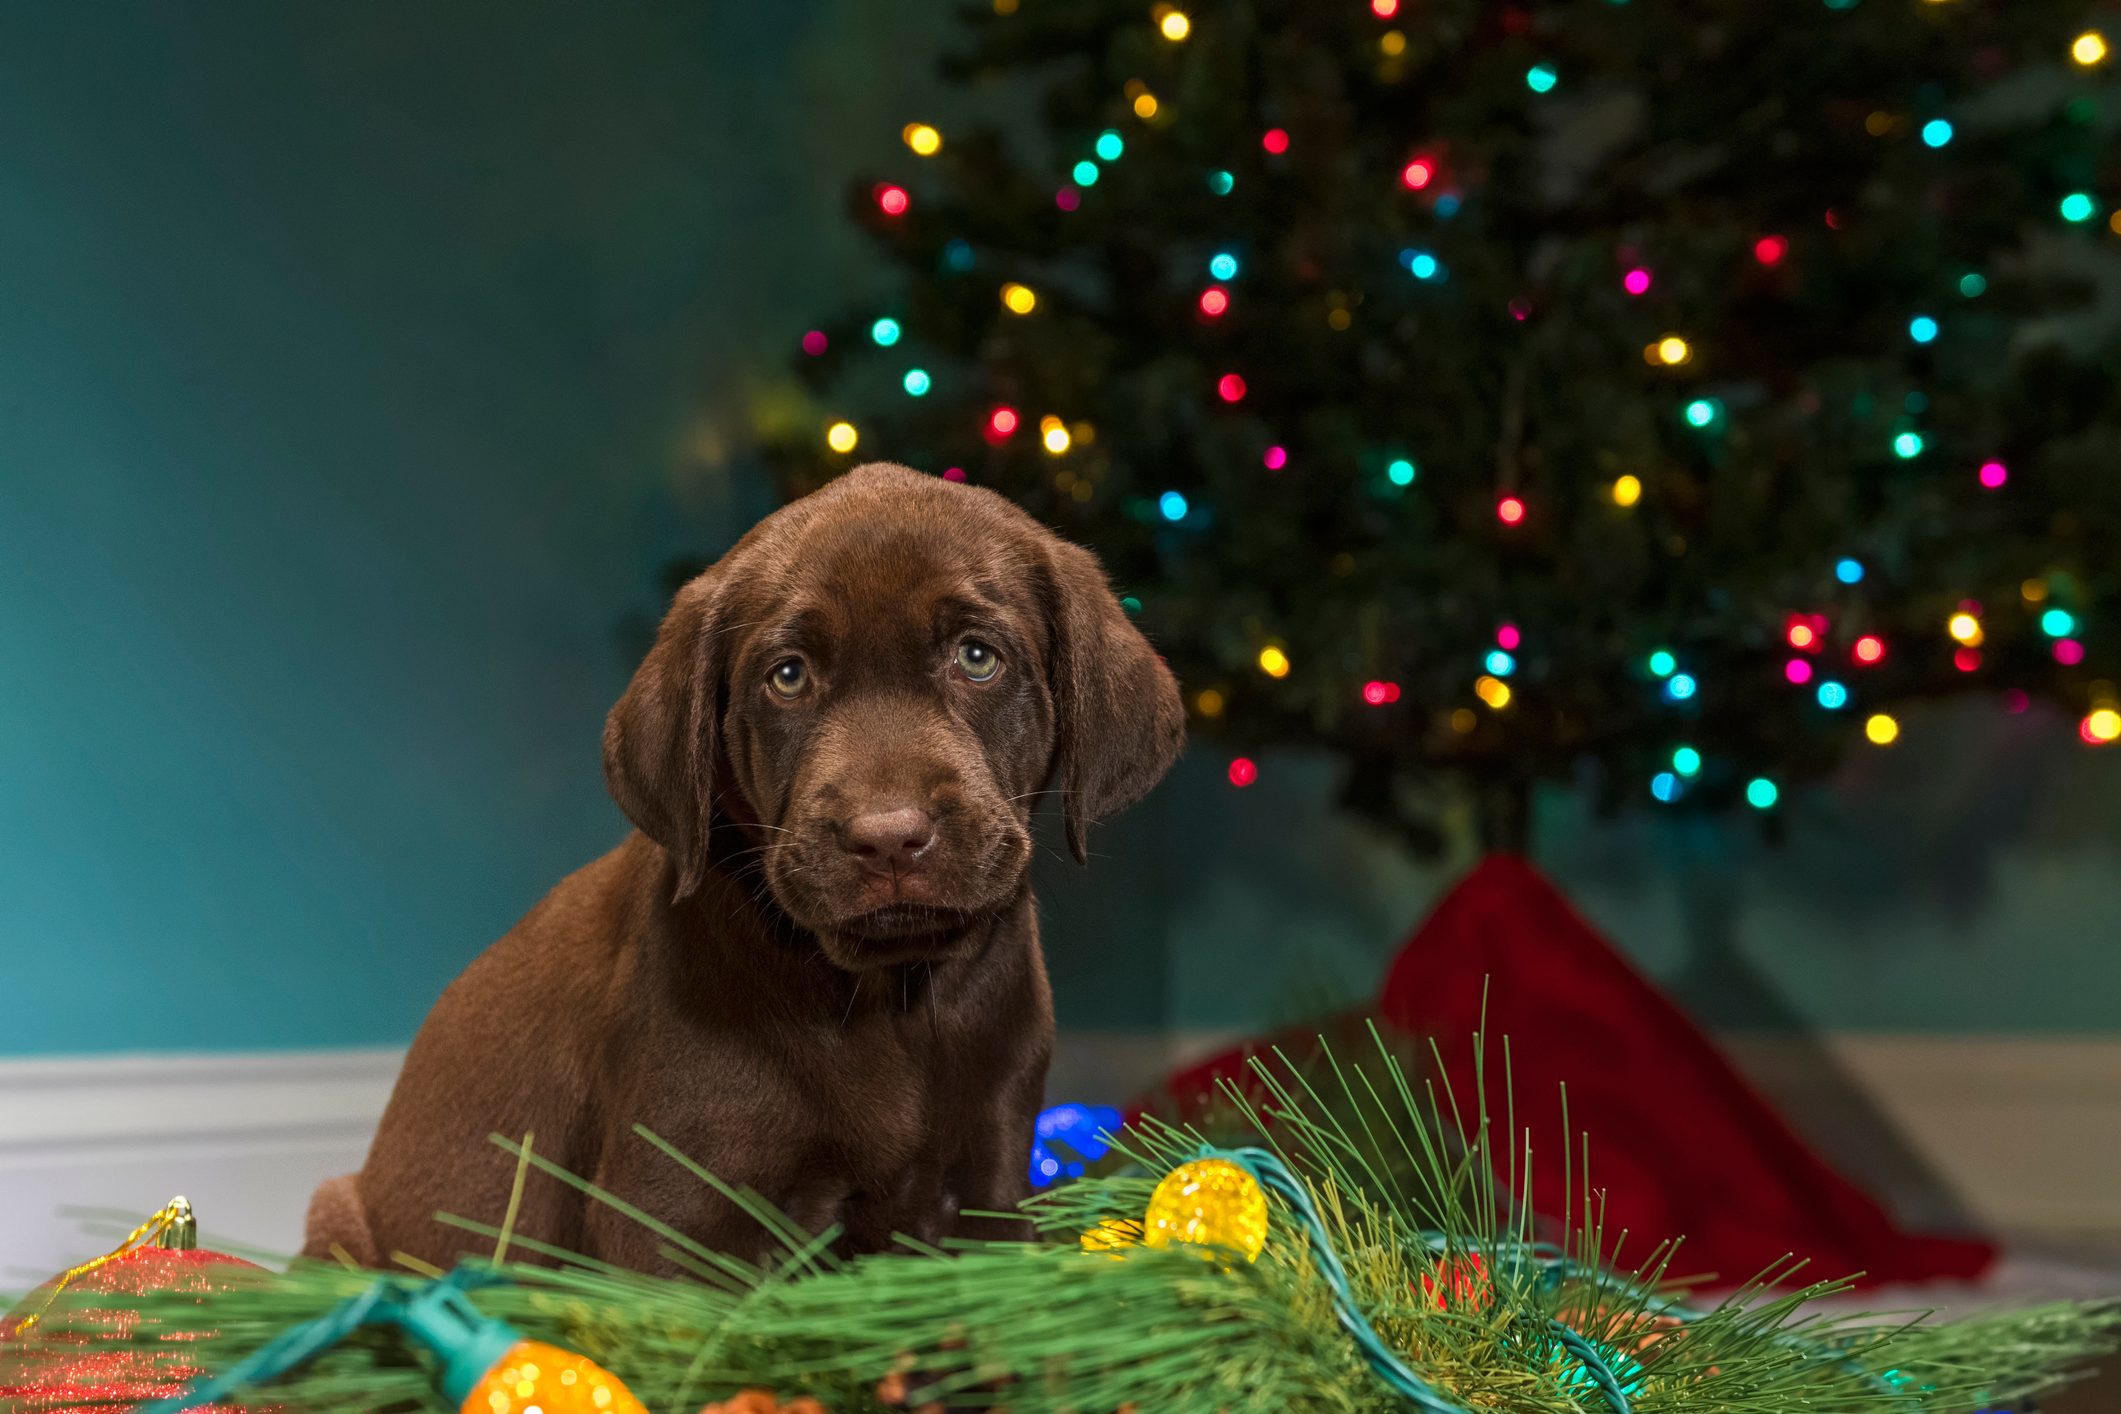 A Chocolate Labrador puppy sitting among the Christmas decorations - 8 weeks old